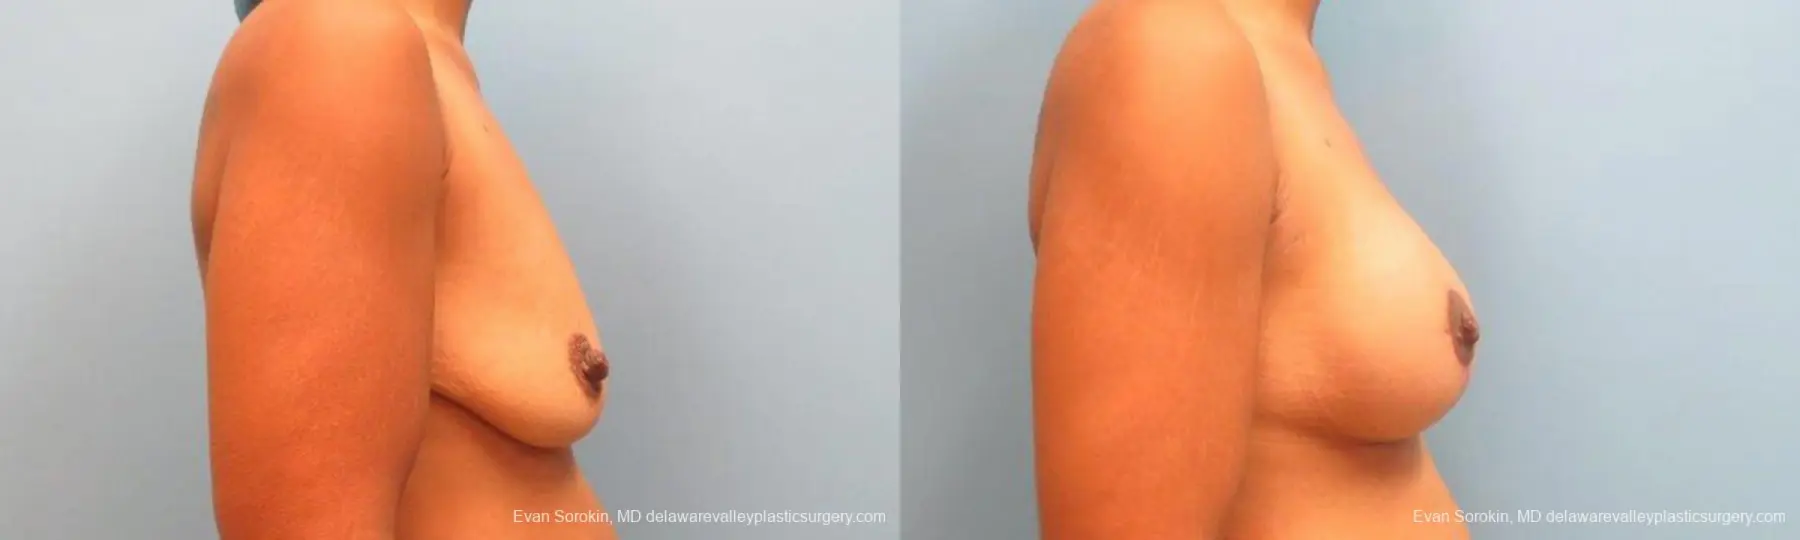 Philadelphia Breast Lift and Augmentation 9343 - Before and After 3